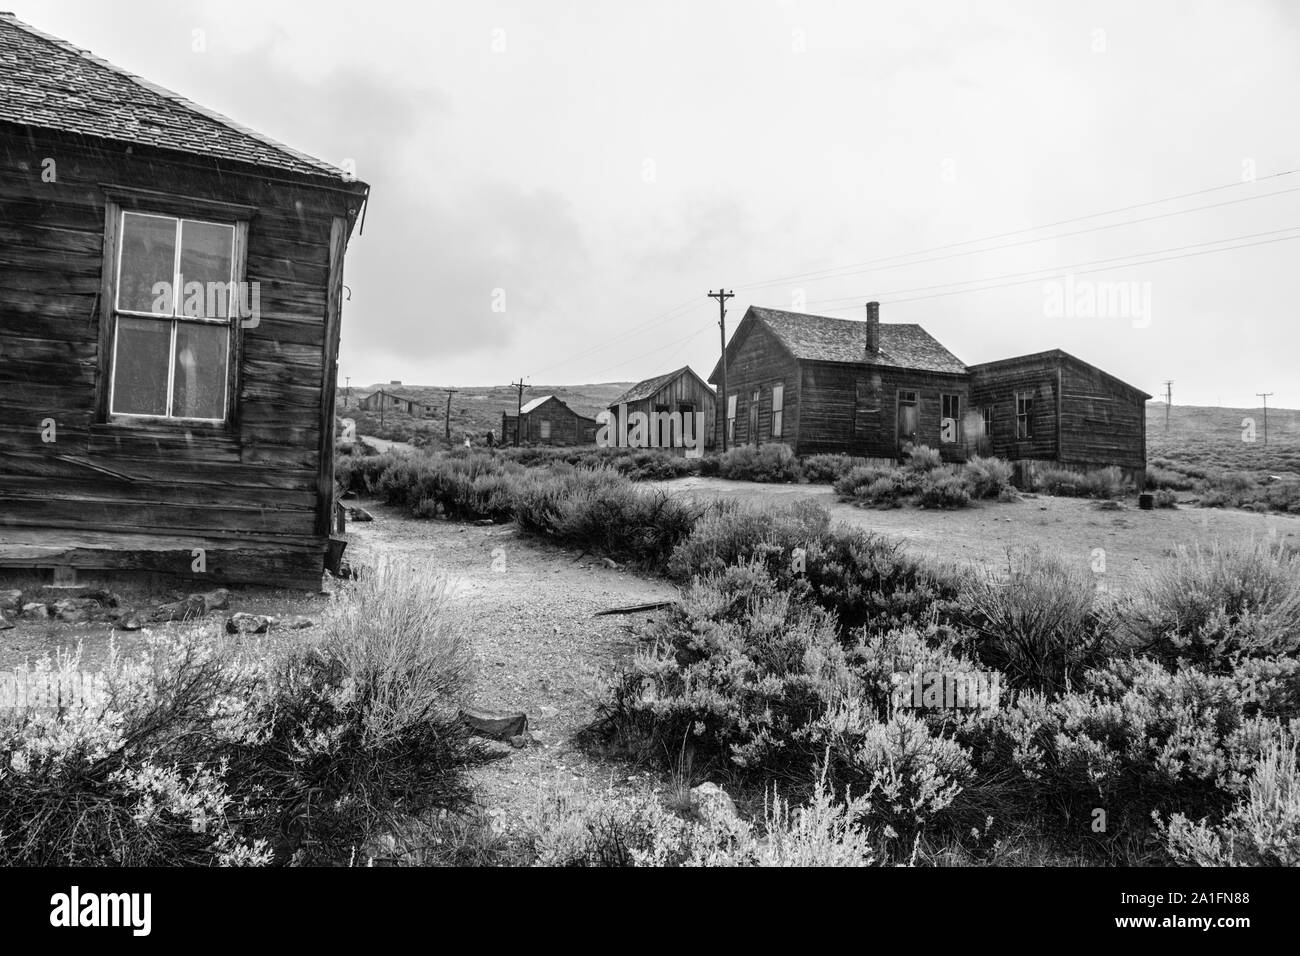 A dilapidated building in the ghost town of Bodie in California on a rainy day Stock Photo